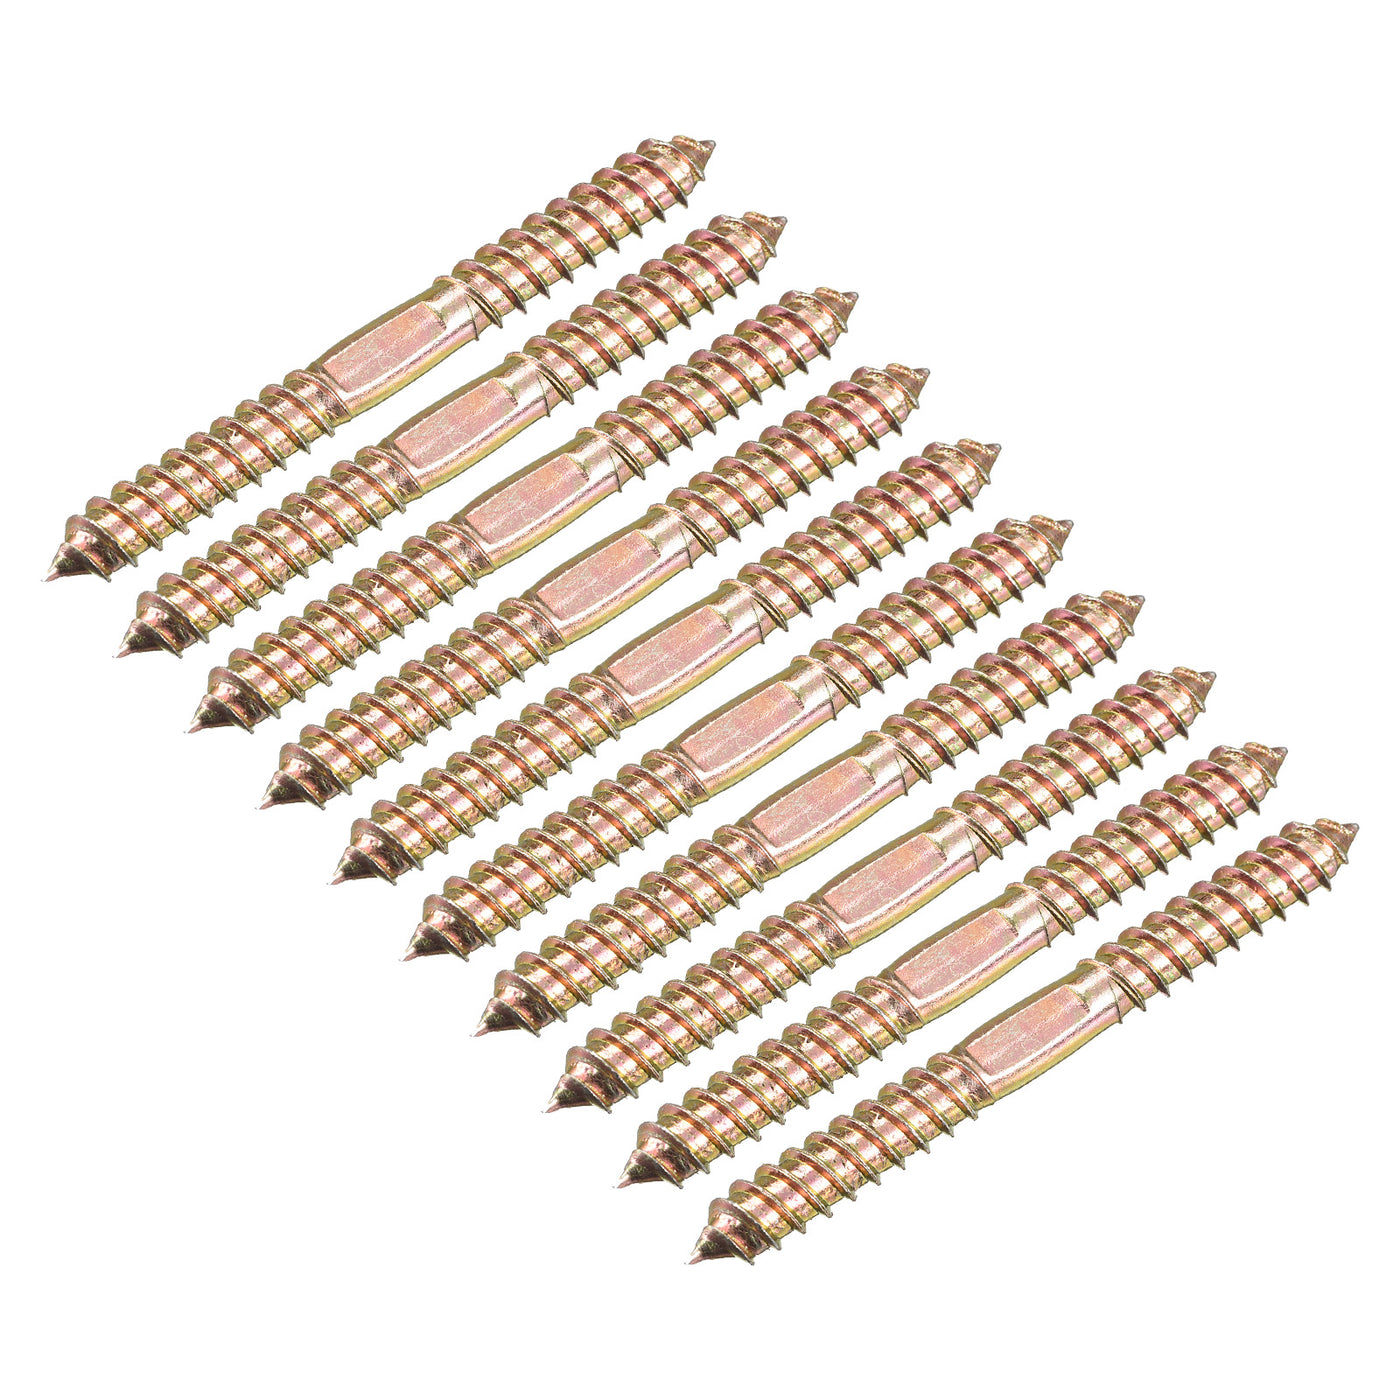 Uxcell Uxcell 10x80mm Hanger Bolts, 48pcs Double Ended Thread Wood to Wood Dowel Screws